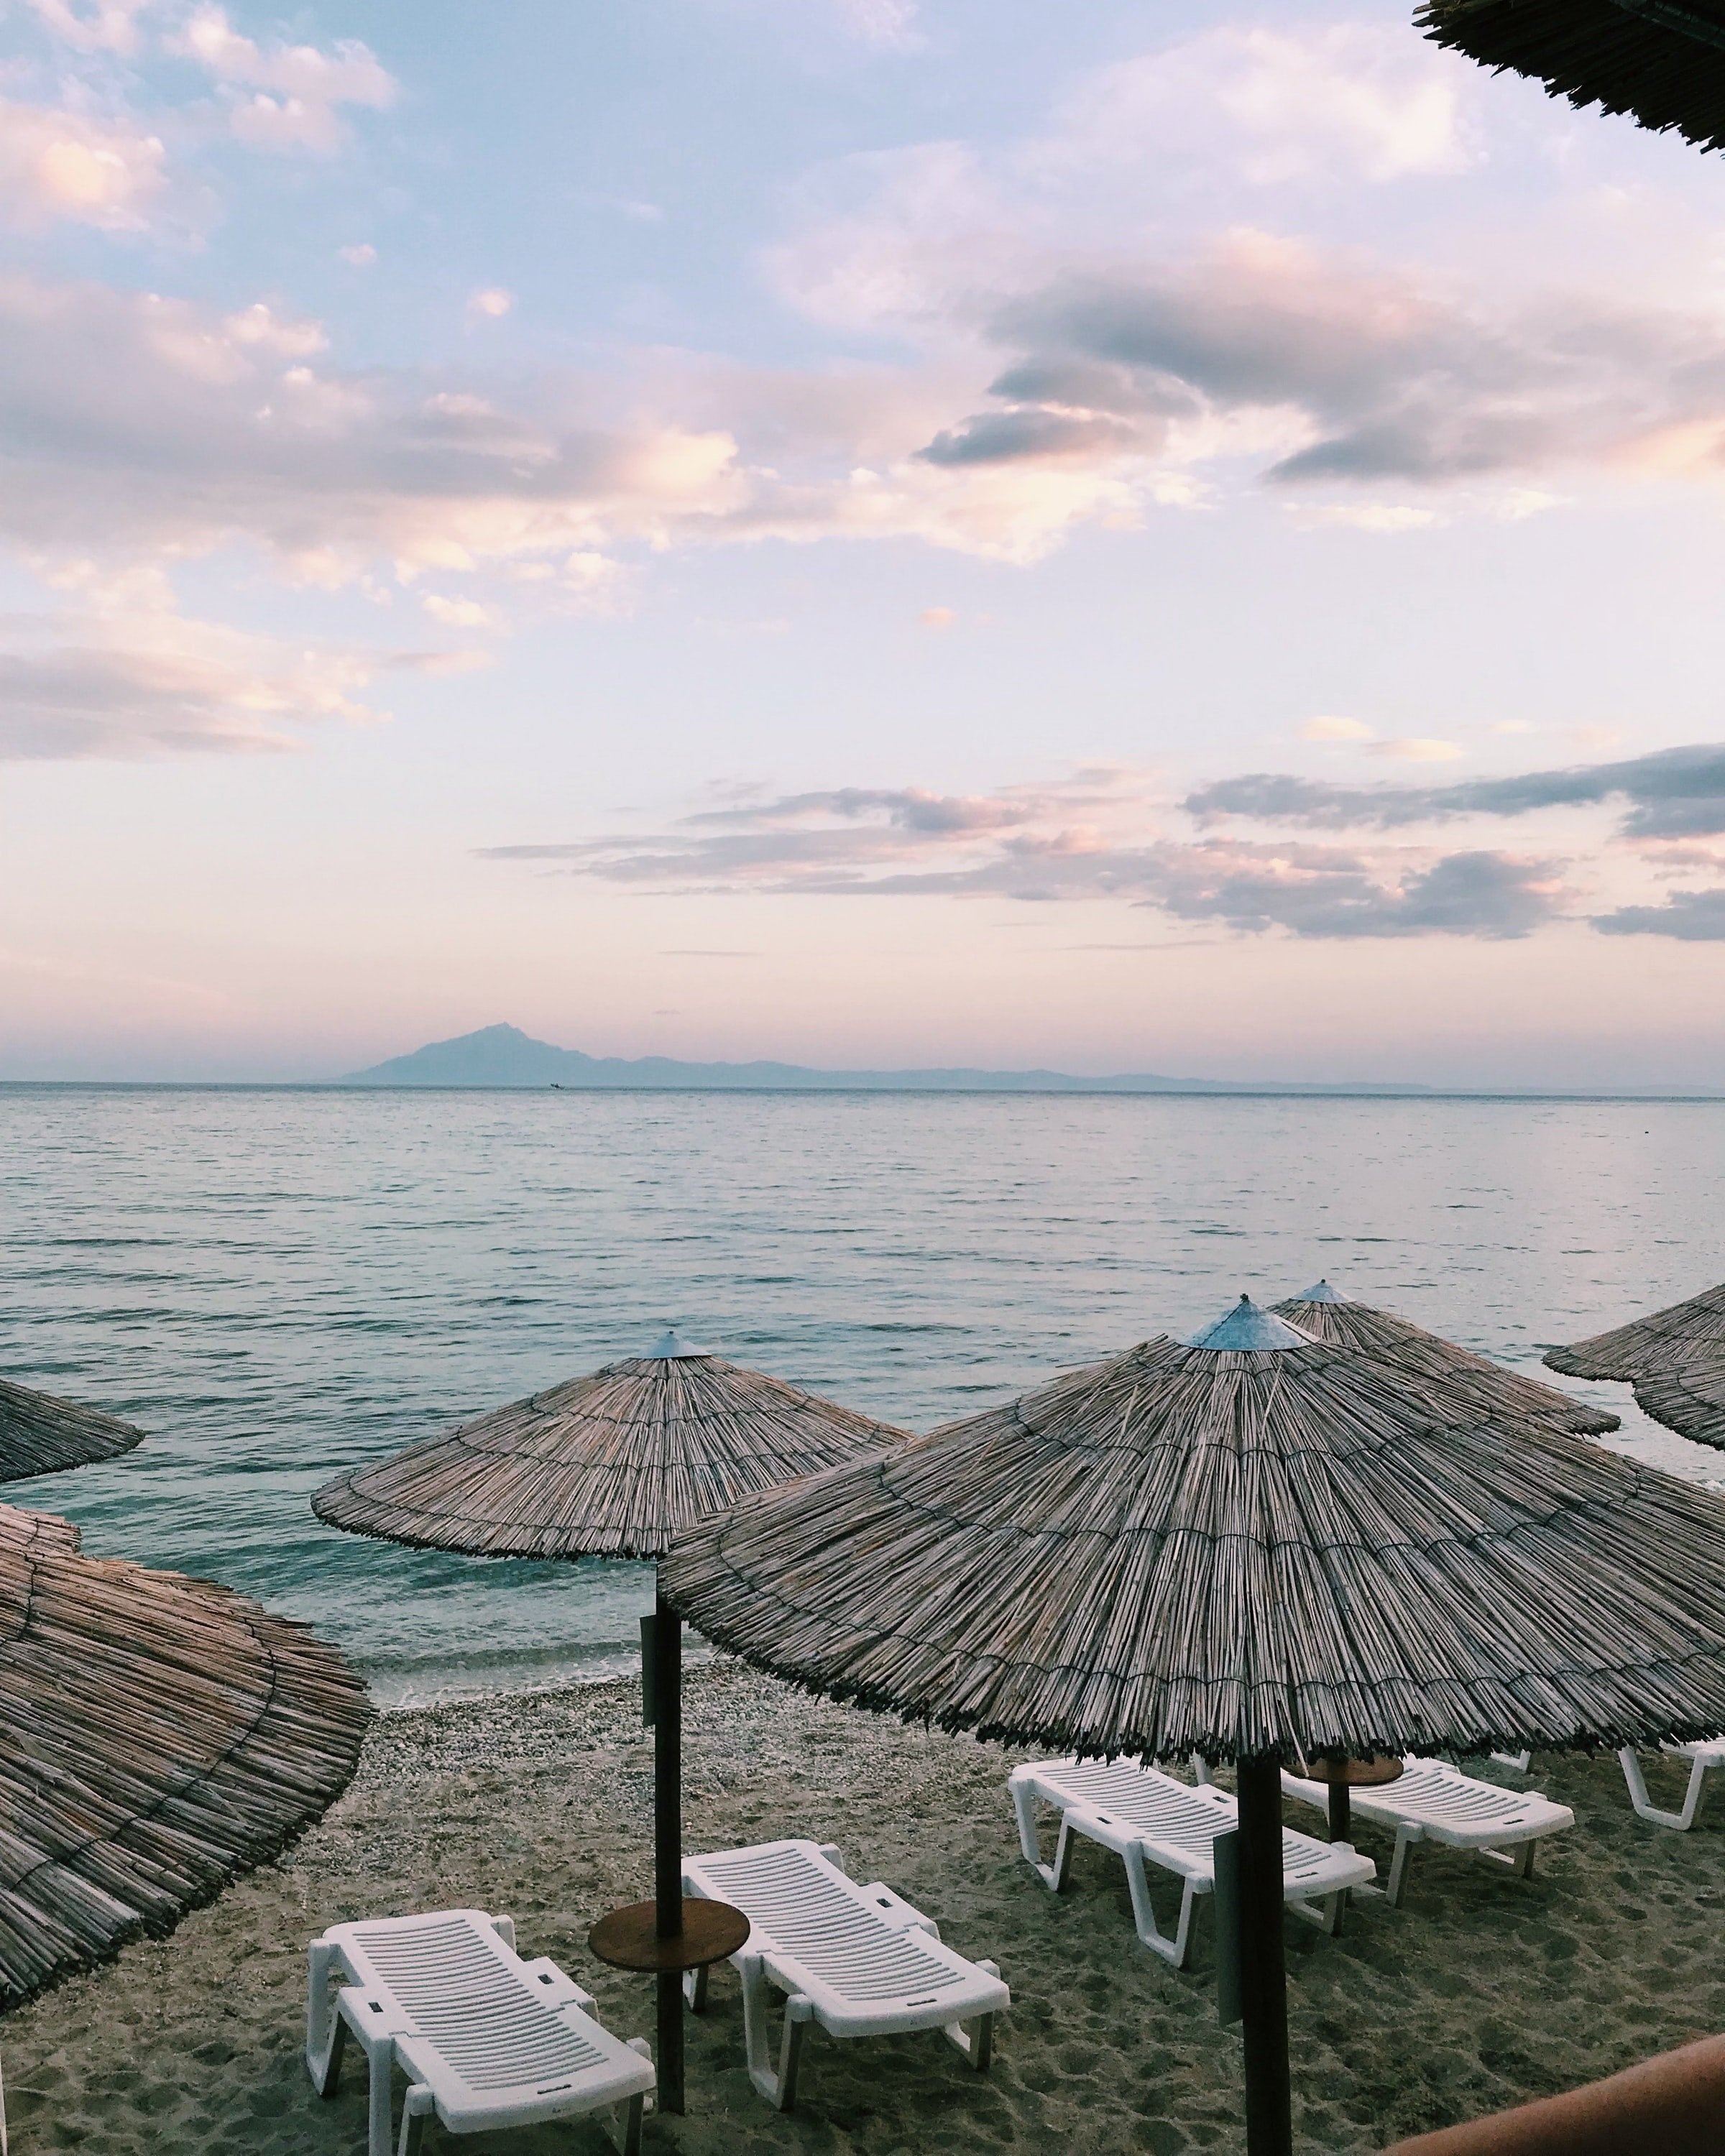 Sunset view to Chalkidiki from Thassos Island